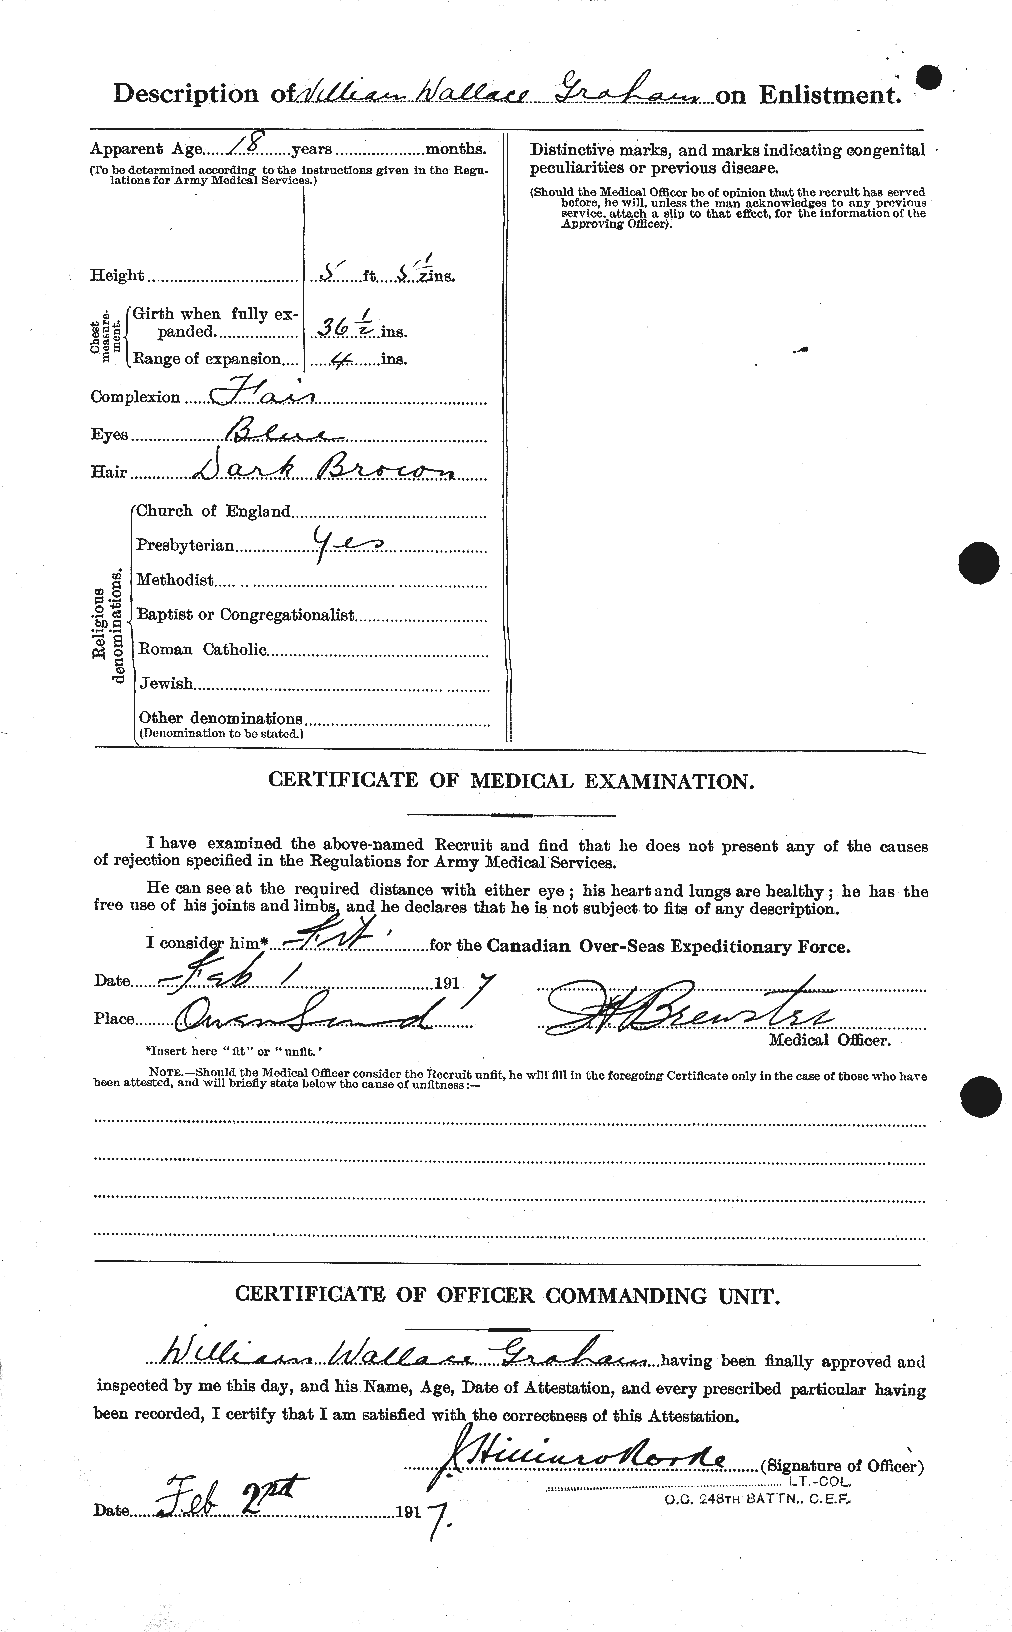 Personnel Records of the First World War - CEF 358044b